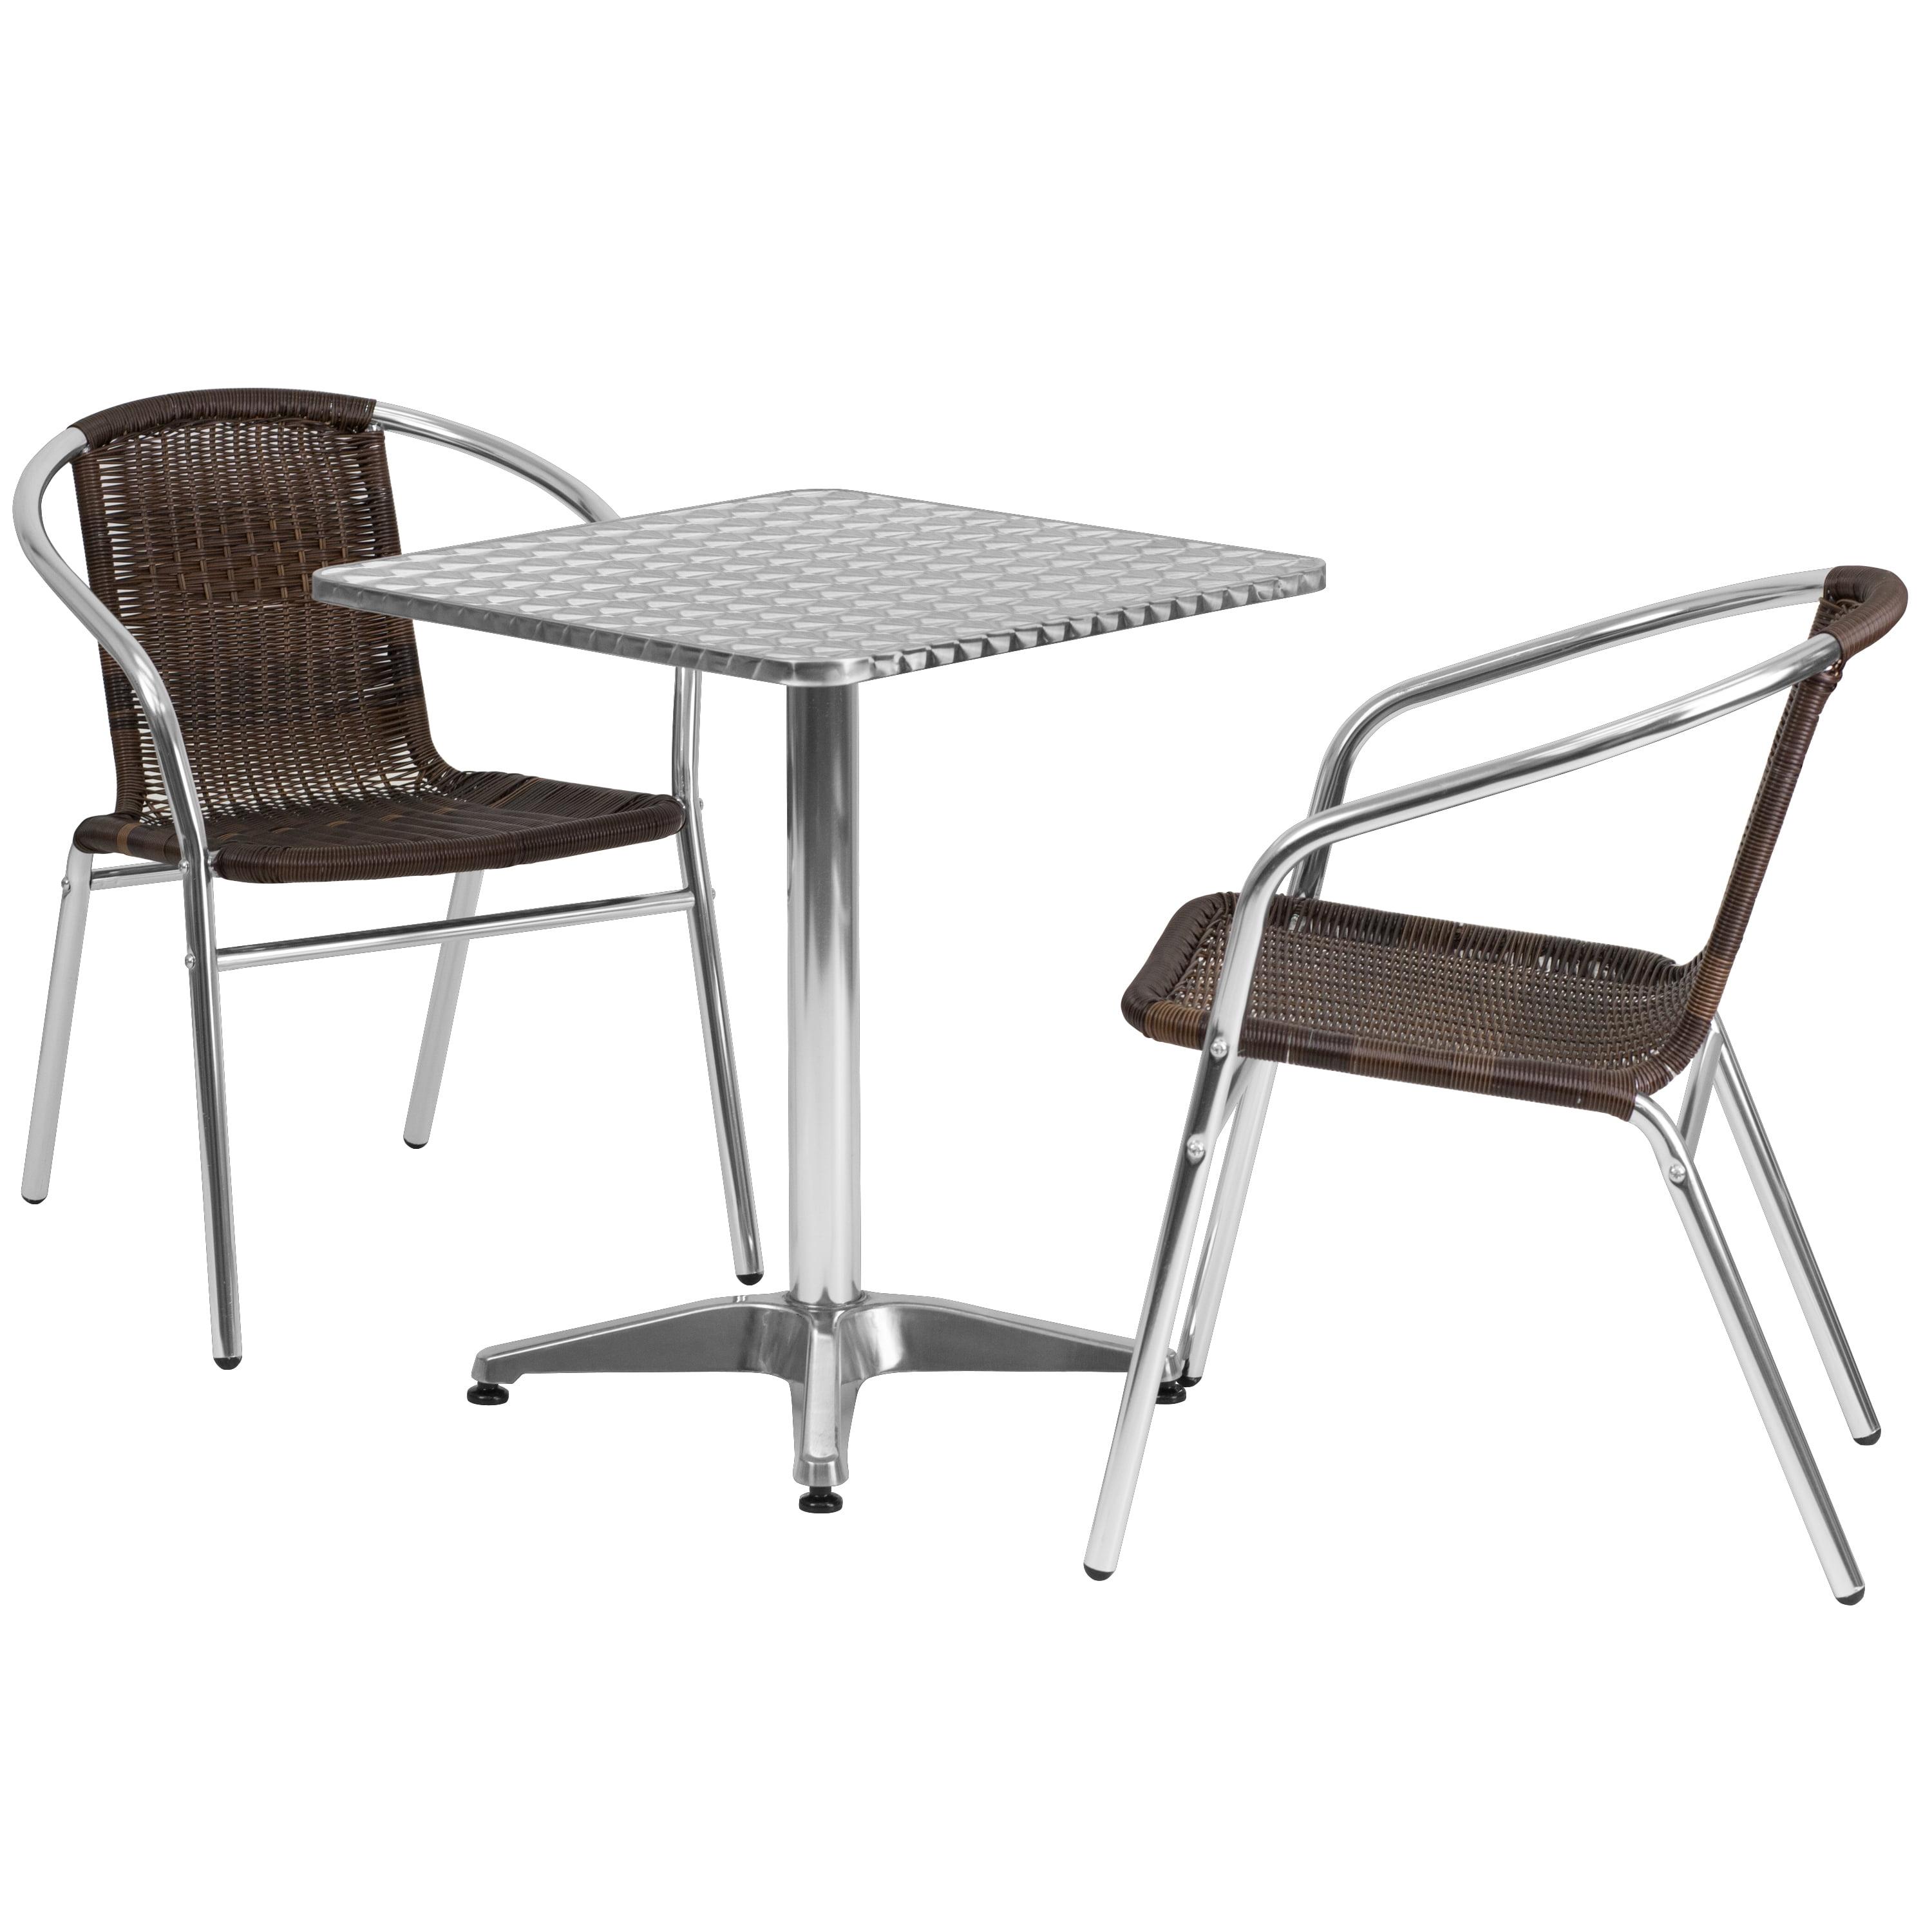 27.5'' Square Stainless Steel Table & 2 Dark Brown Rattan Chairs Set